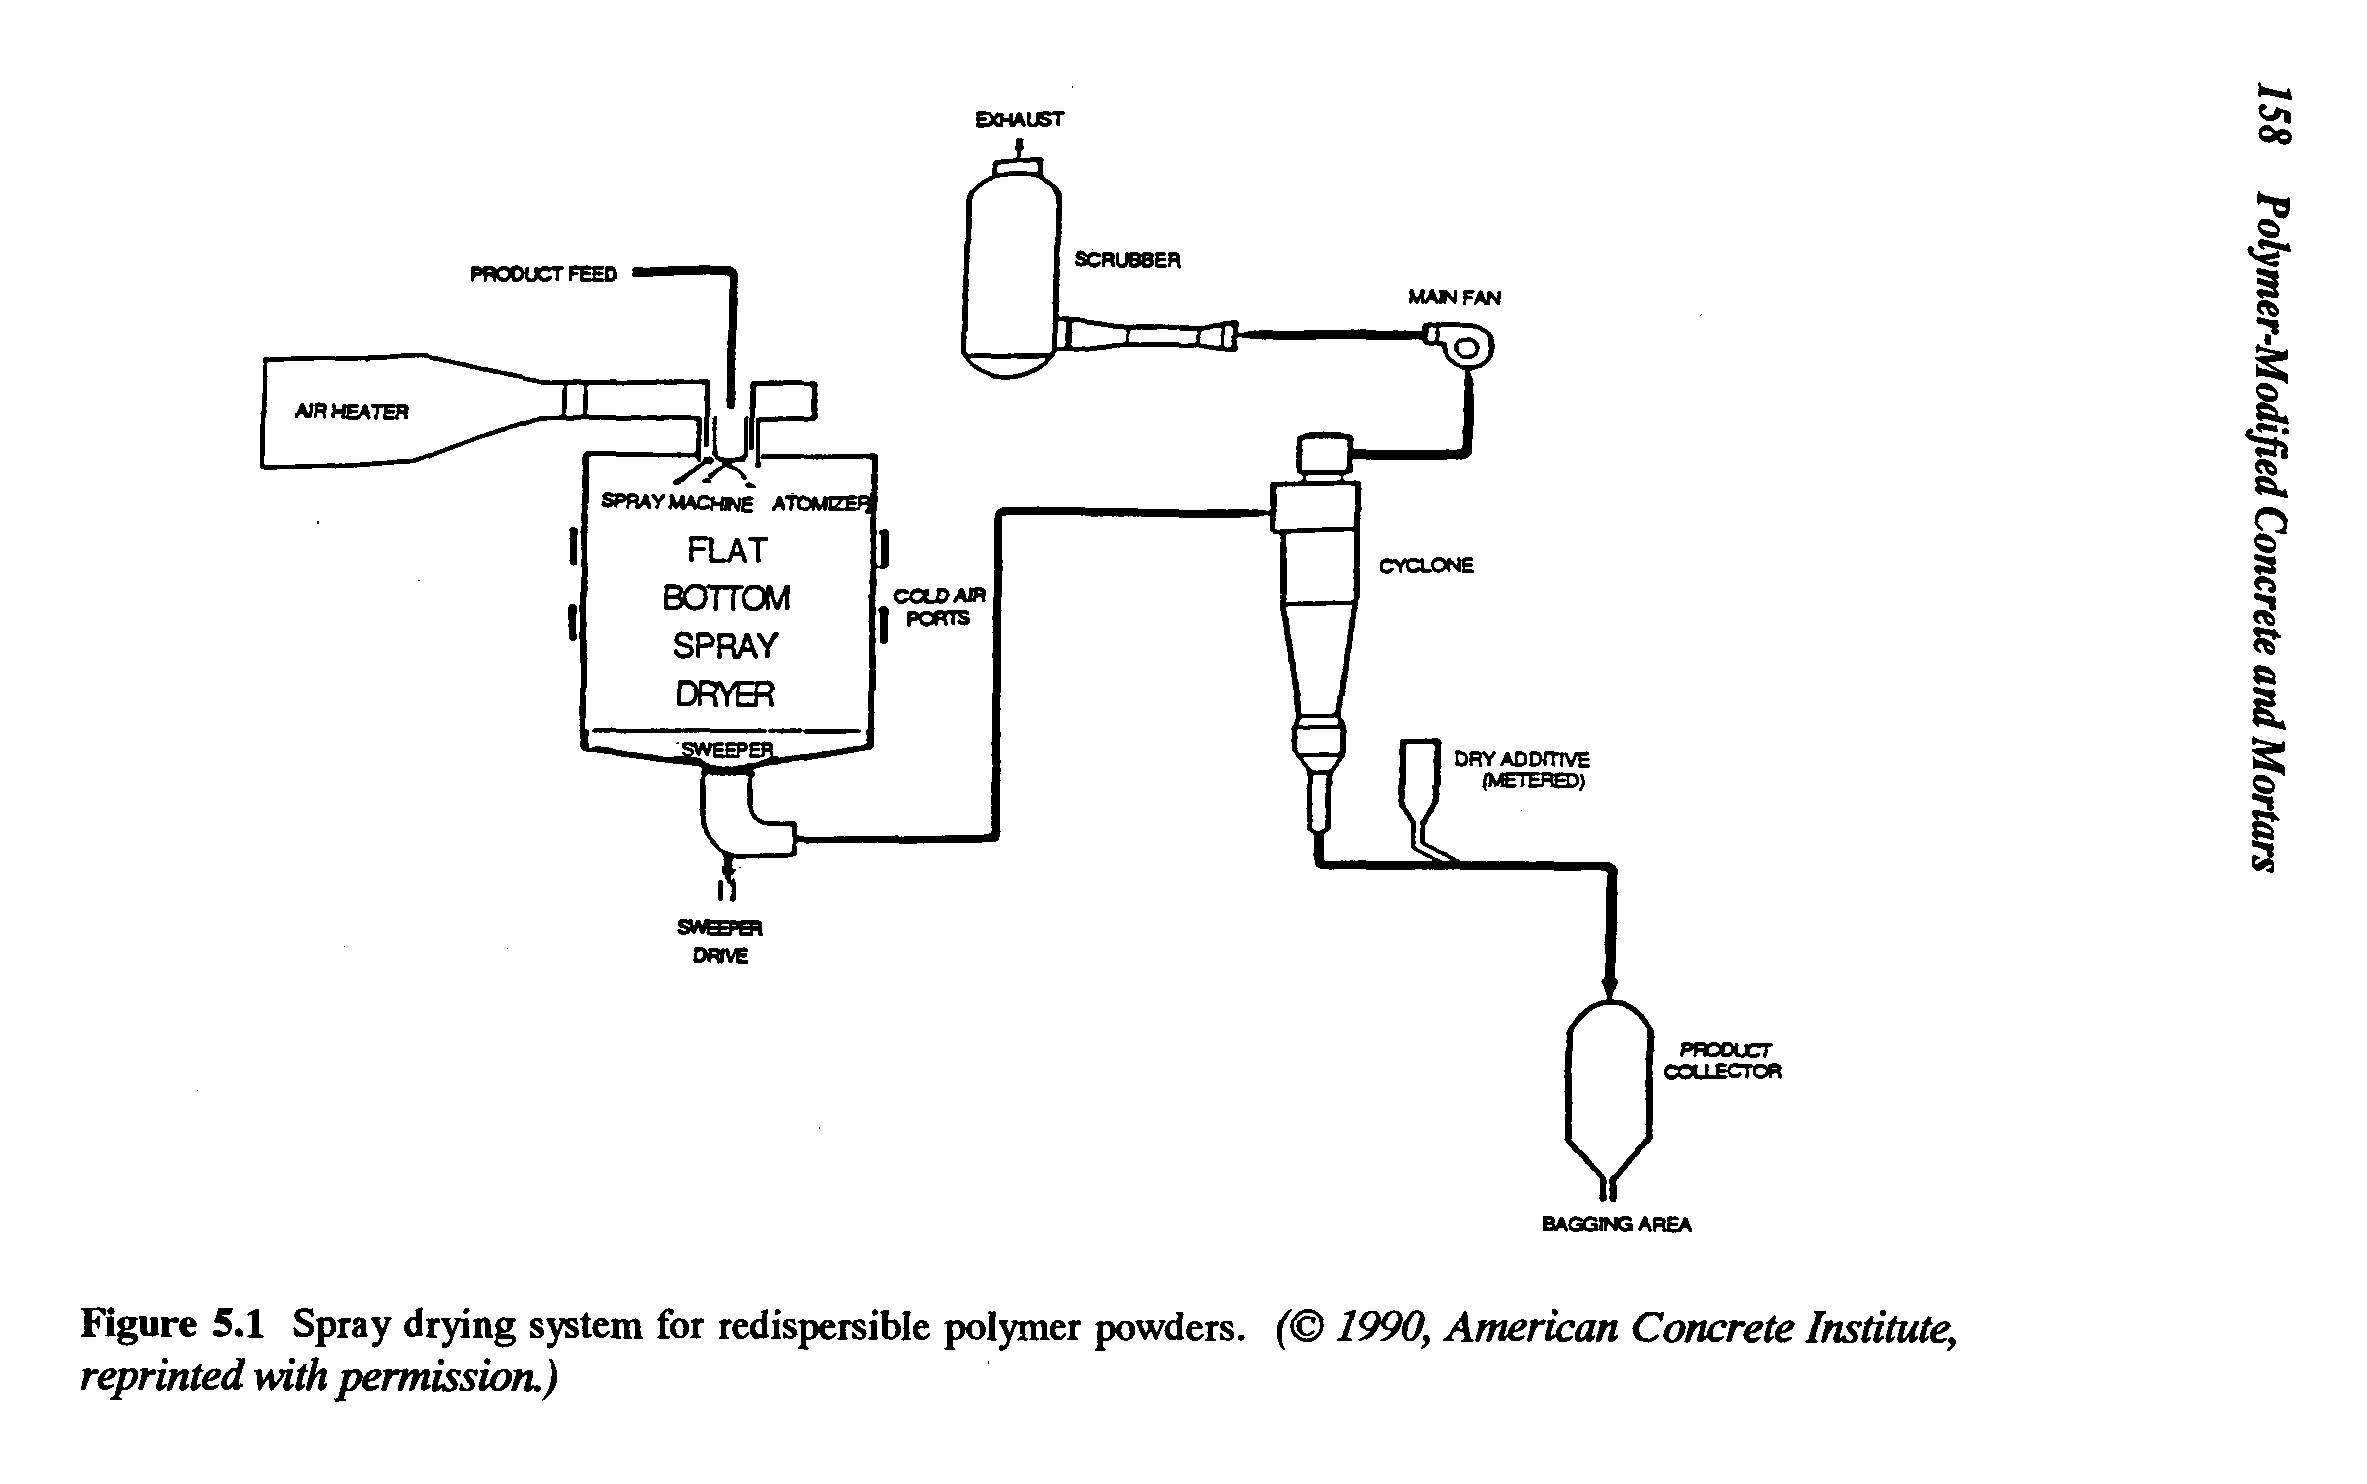 Figure 5.1 Spray drying system for redispersible polymer powders. 1990, American Concrete Institute, reprinted with permission.)...